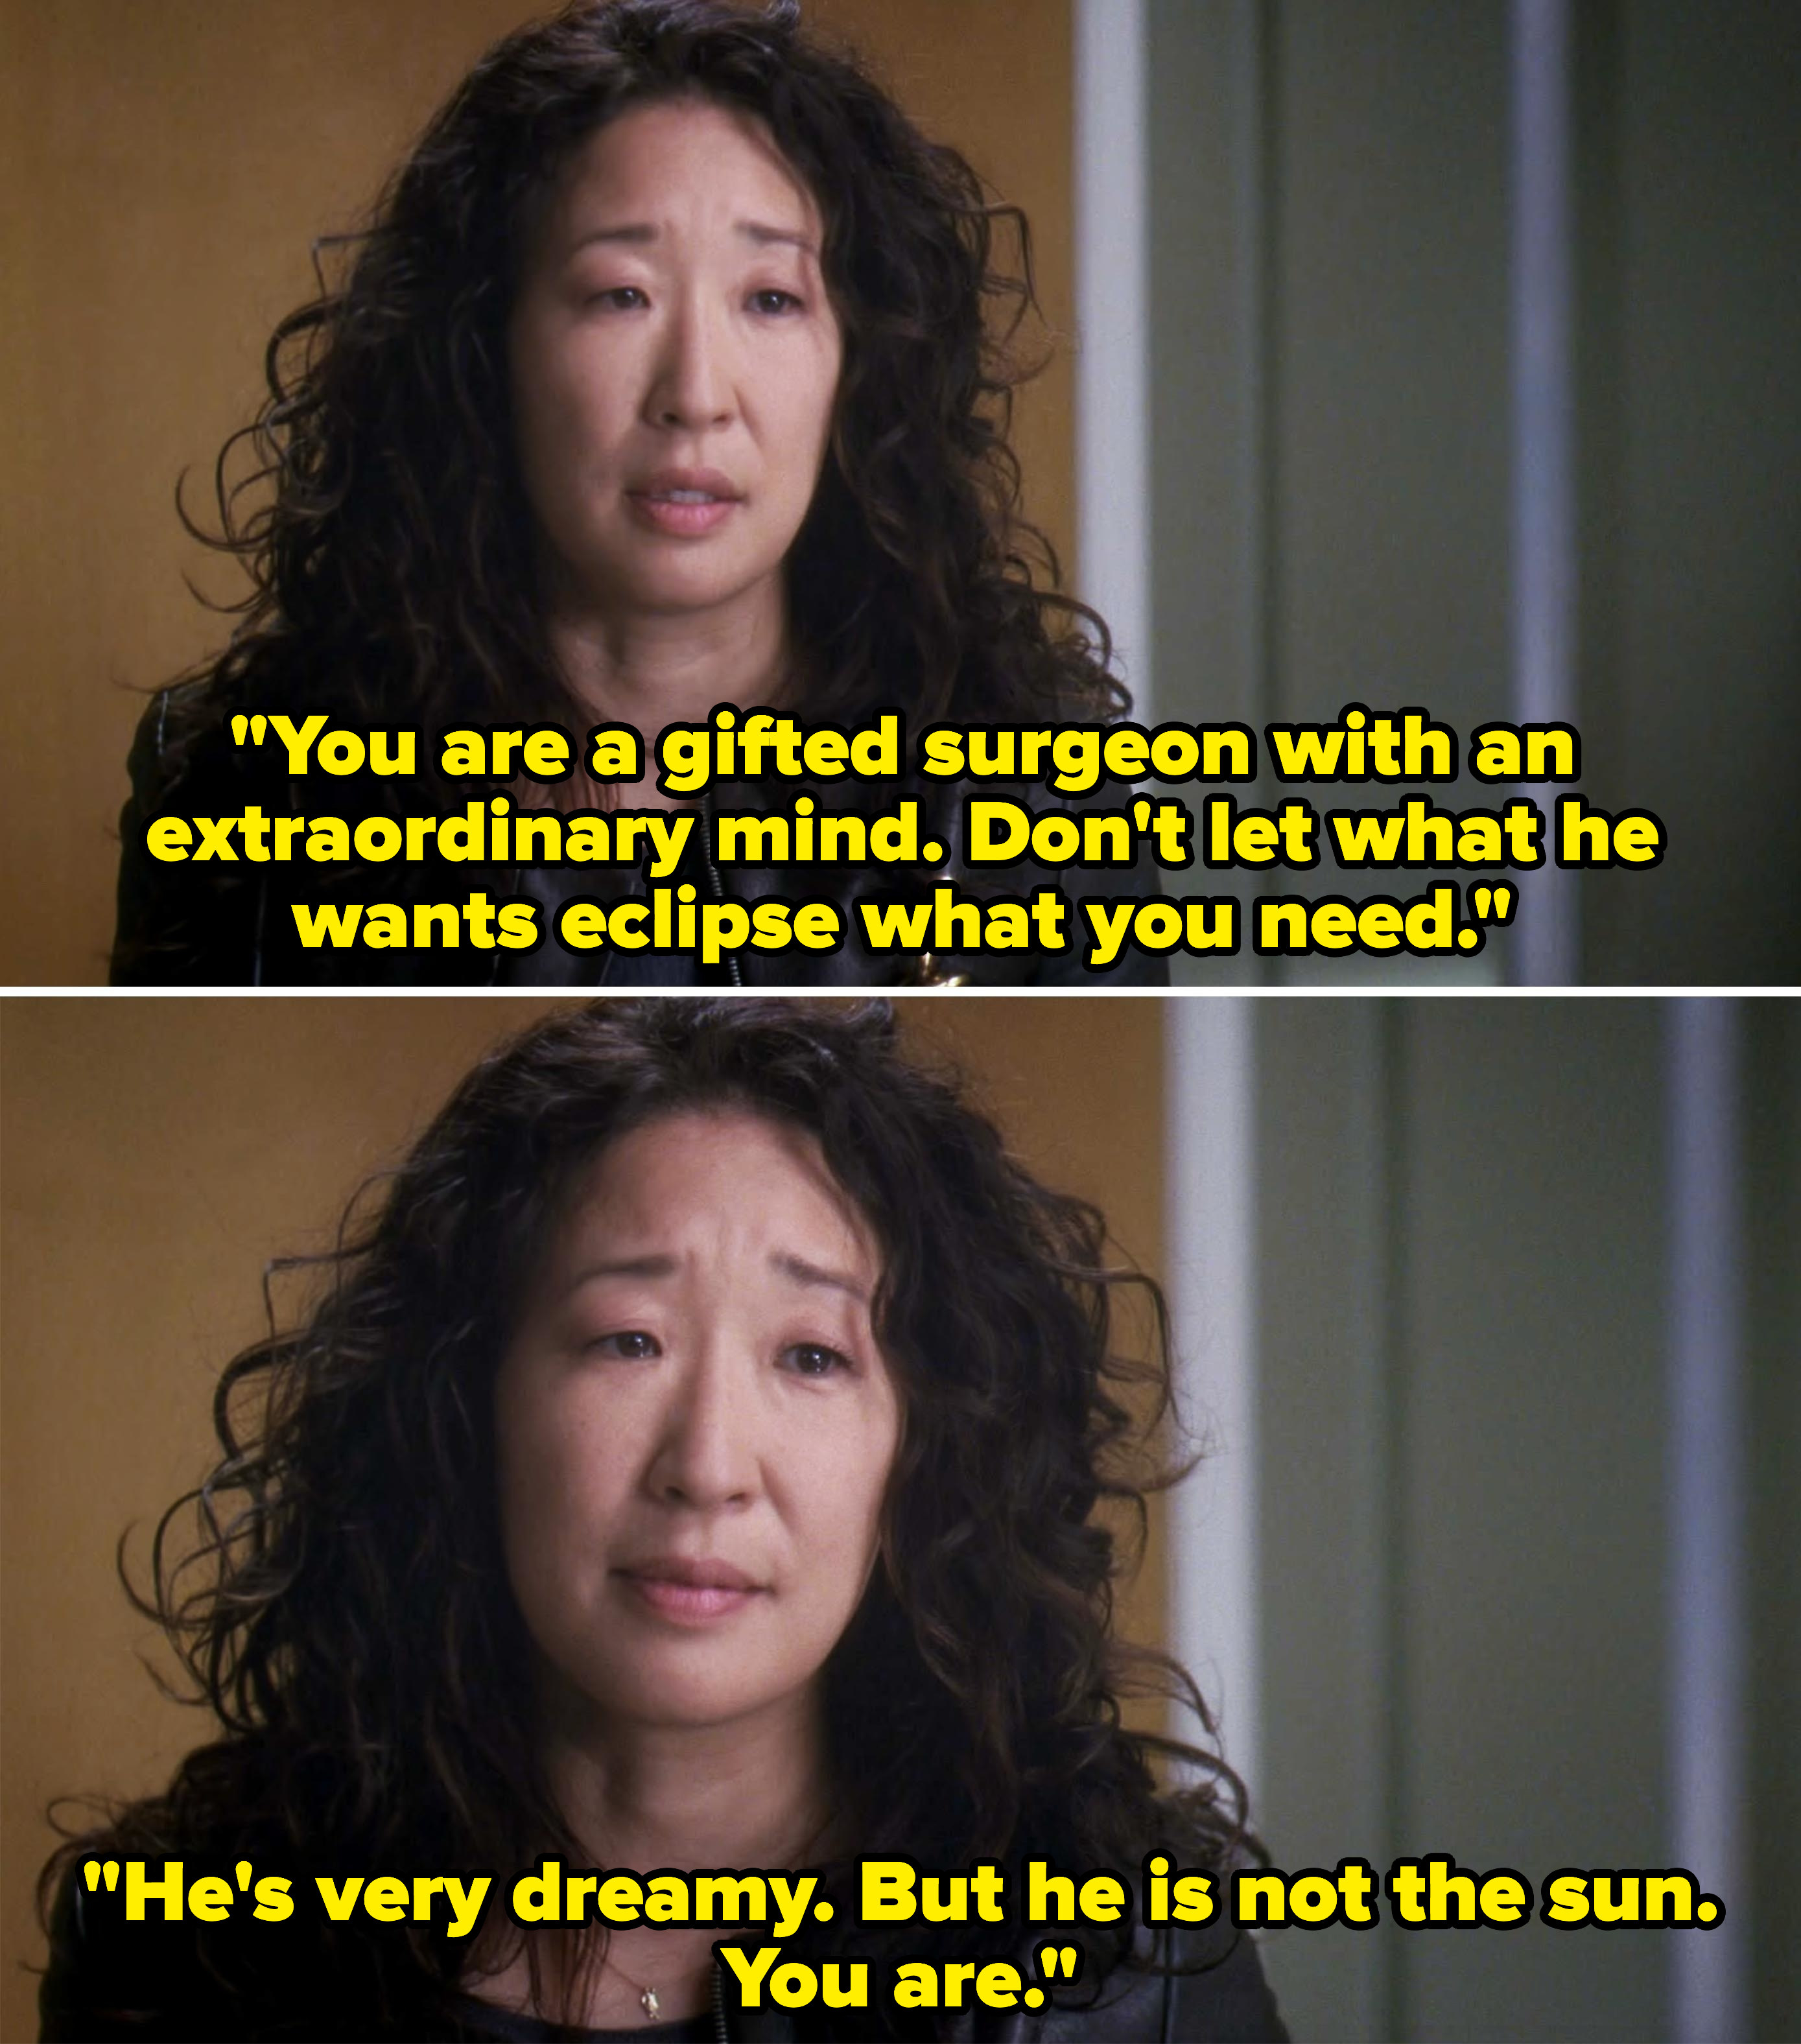 you are a gifter surgeon with an estraordinary mind. don&#x27;t let what he wants eclipse what you need. he&#x27;s very dreamy but he is not the sun you are